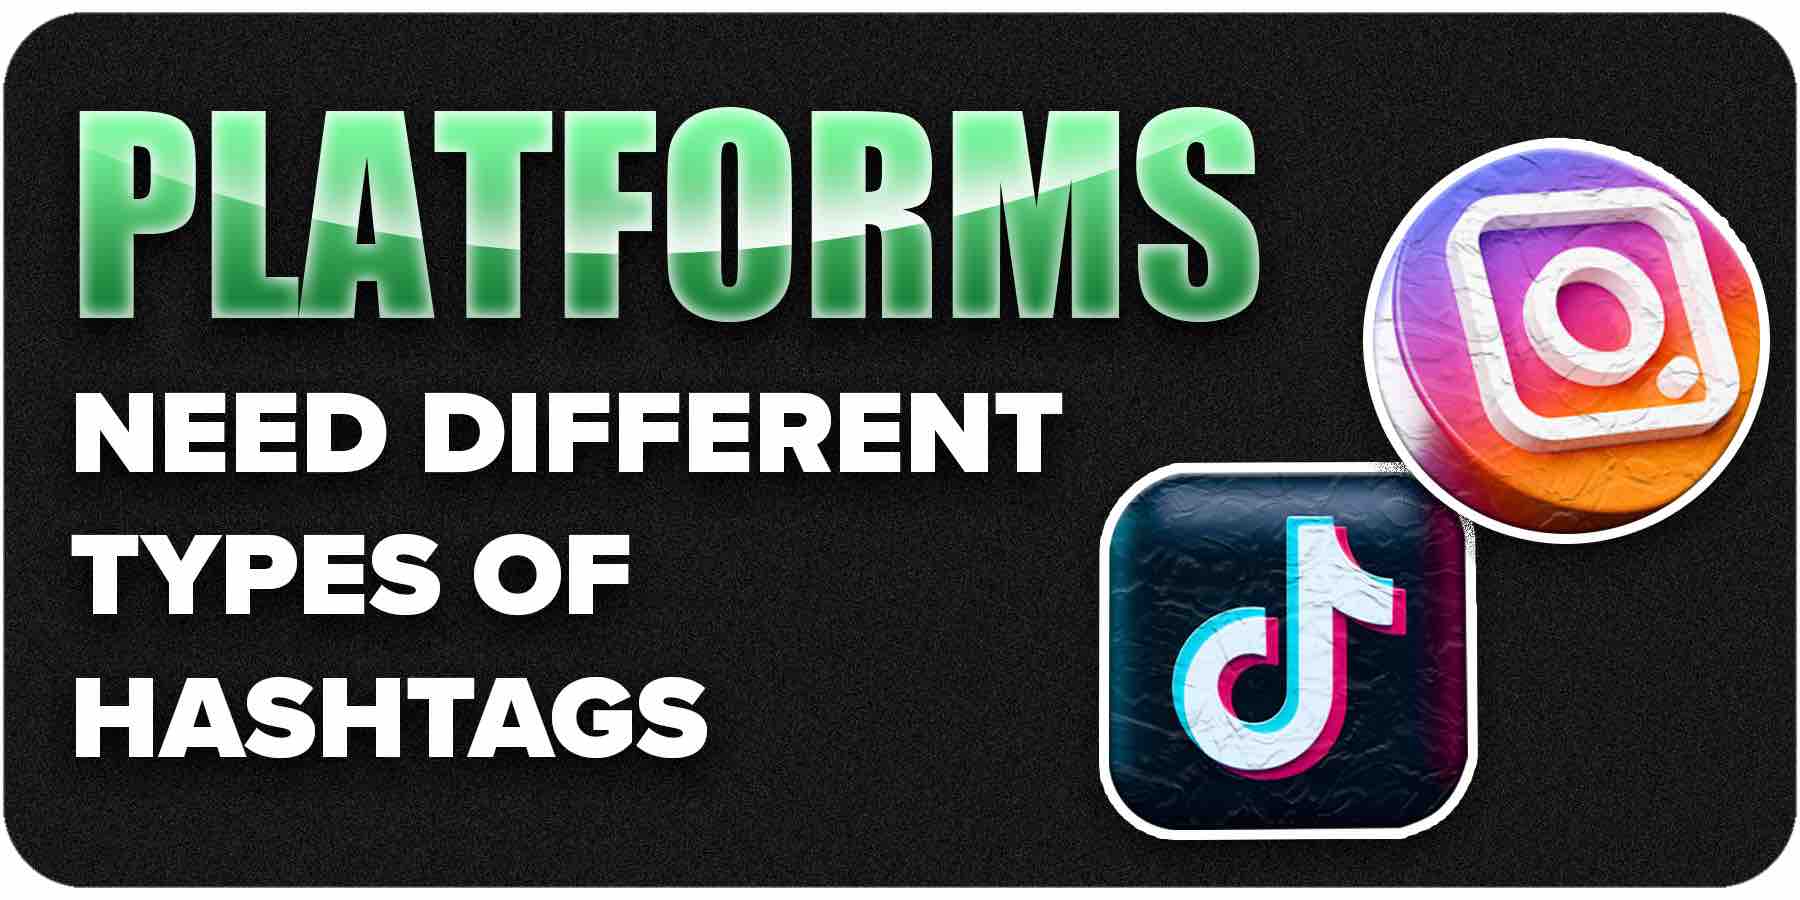 Hashtags and platforms